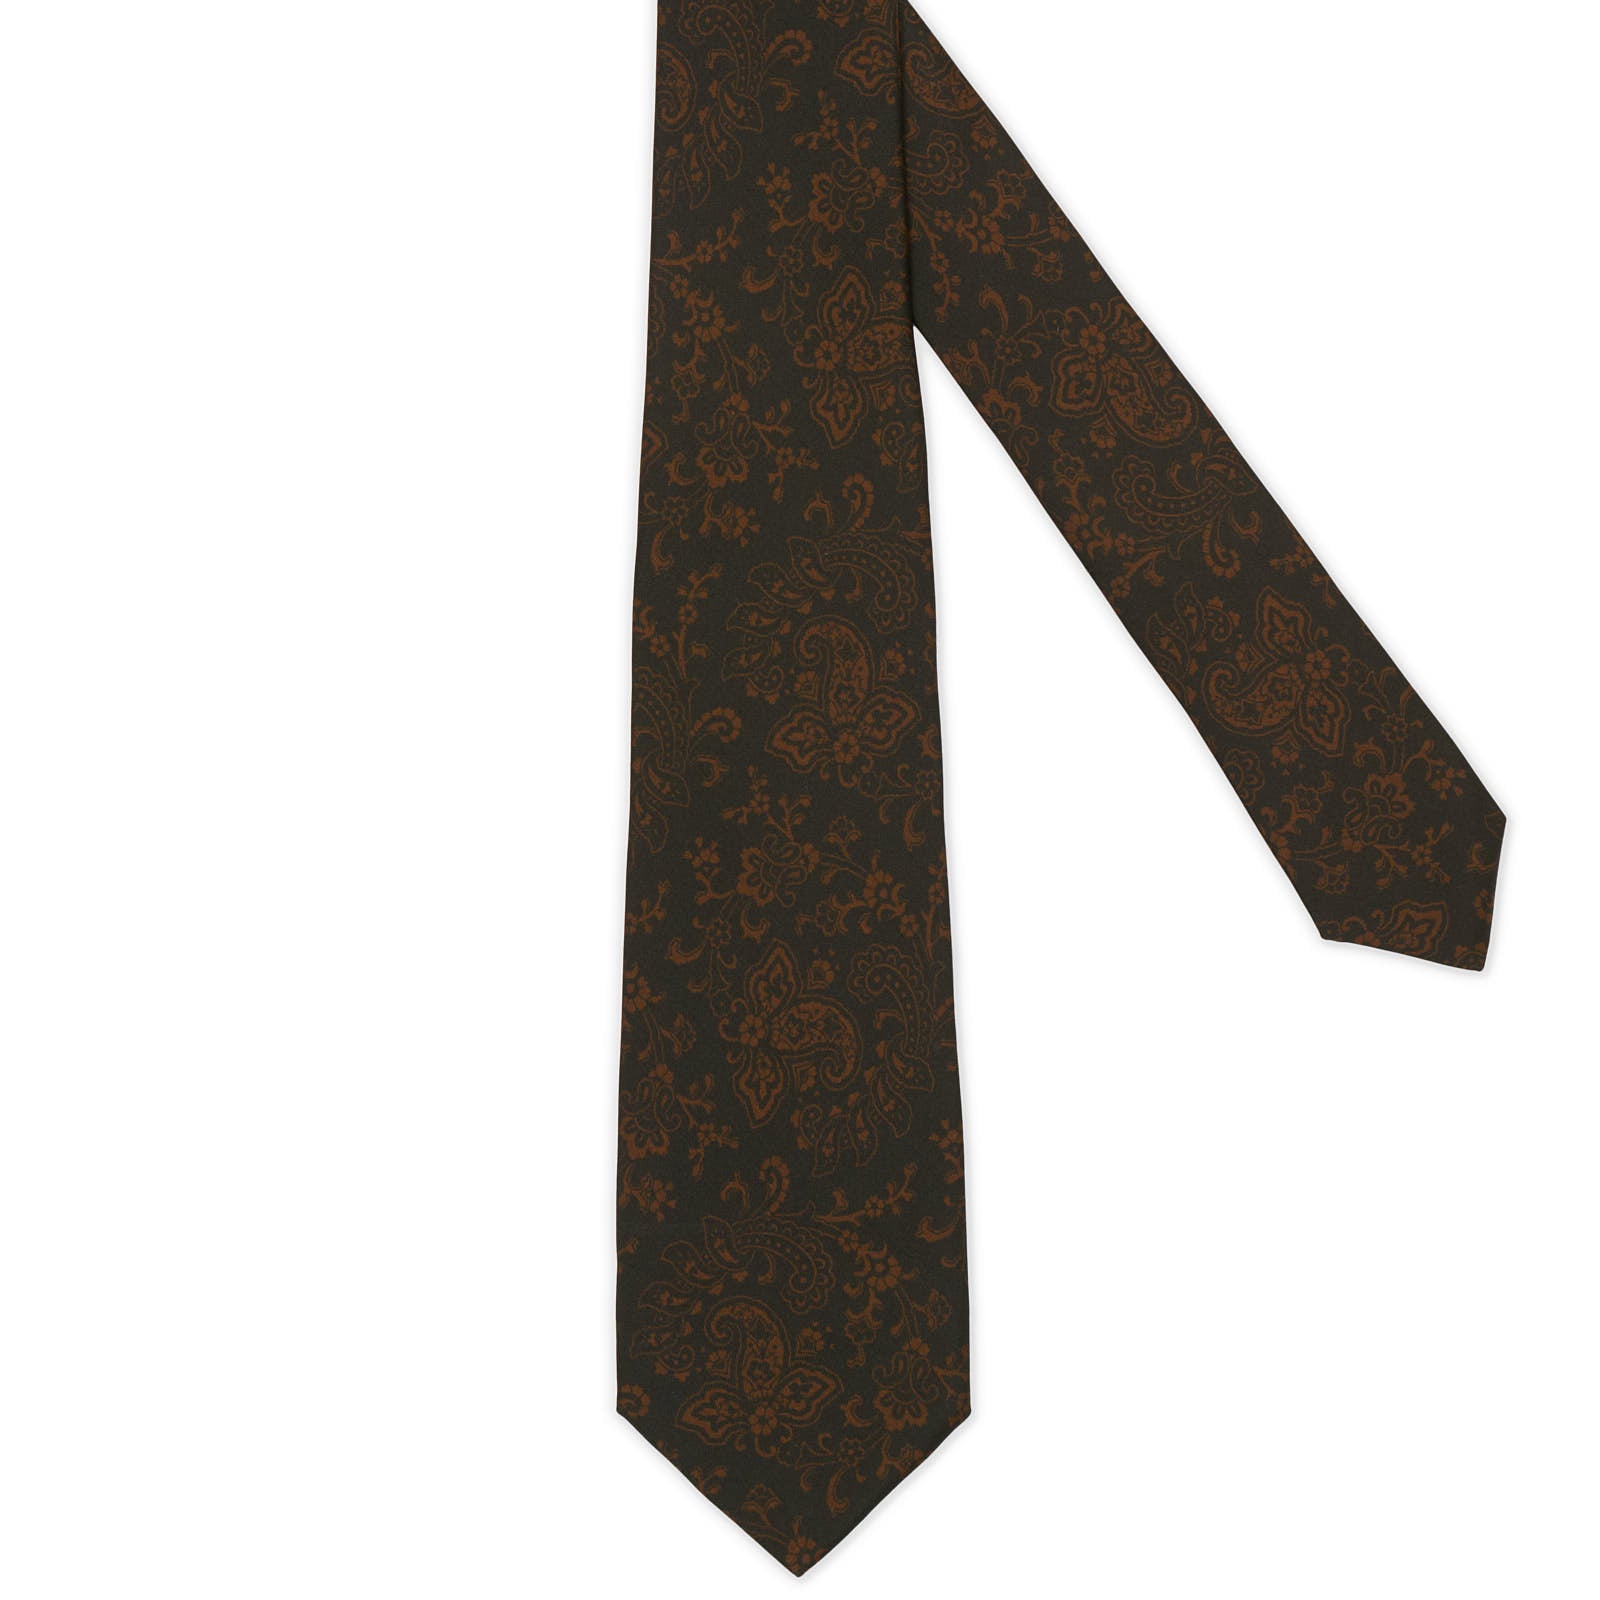 KITON Black-Brown Paisely Seven Fold Silk Tie NEW